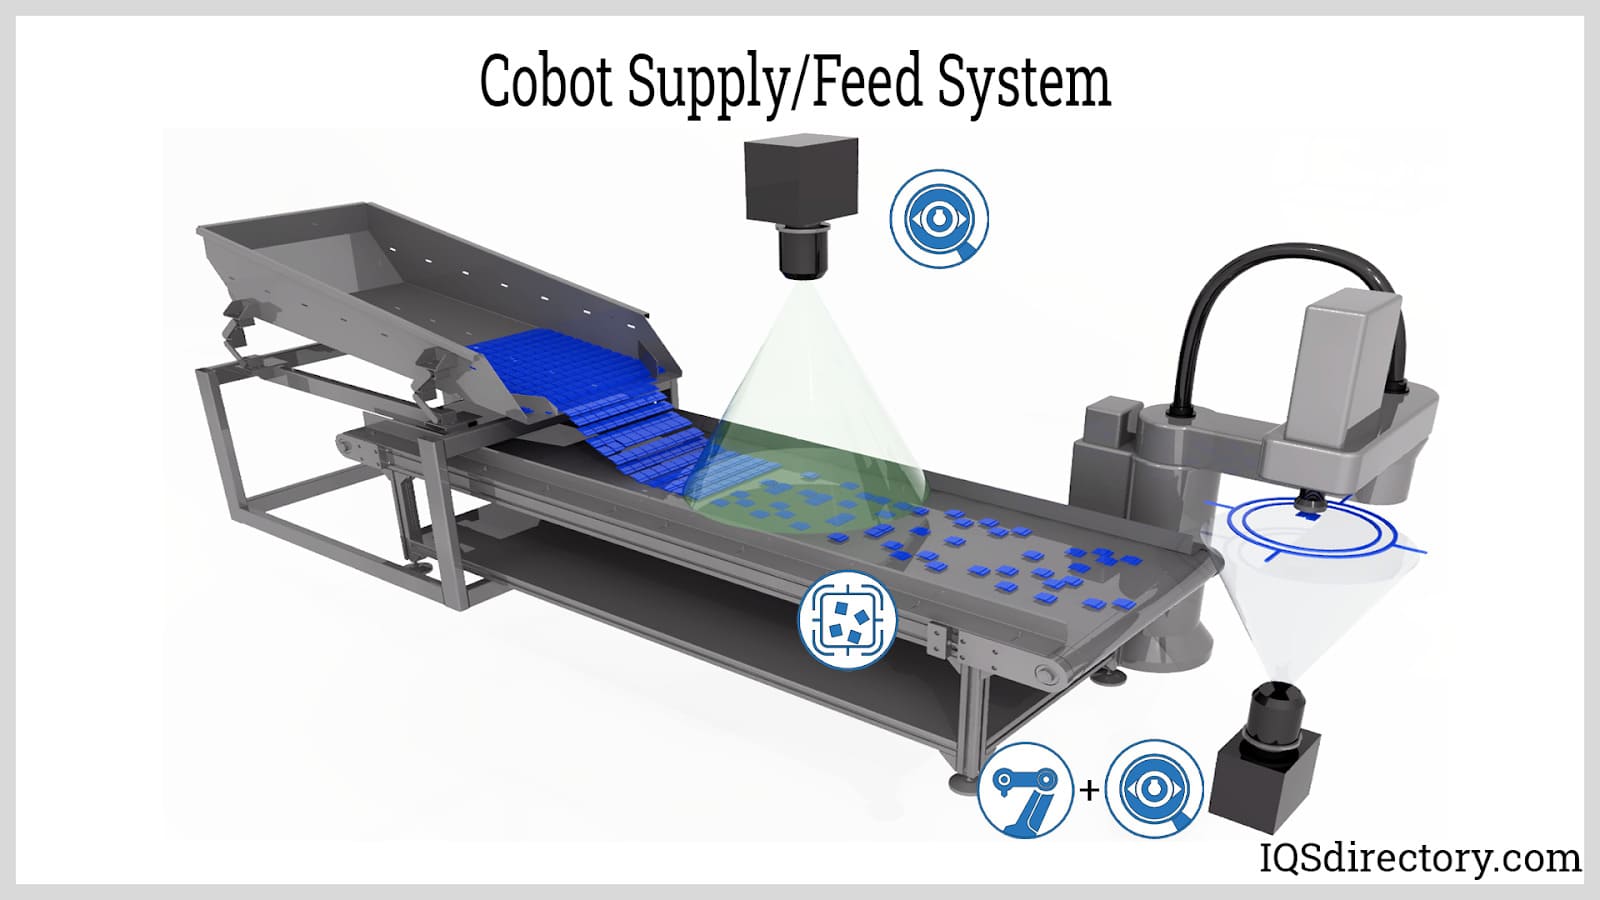 Cobot Supply/Feed System